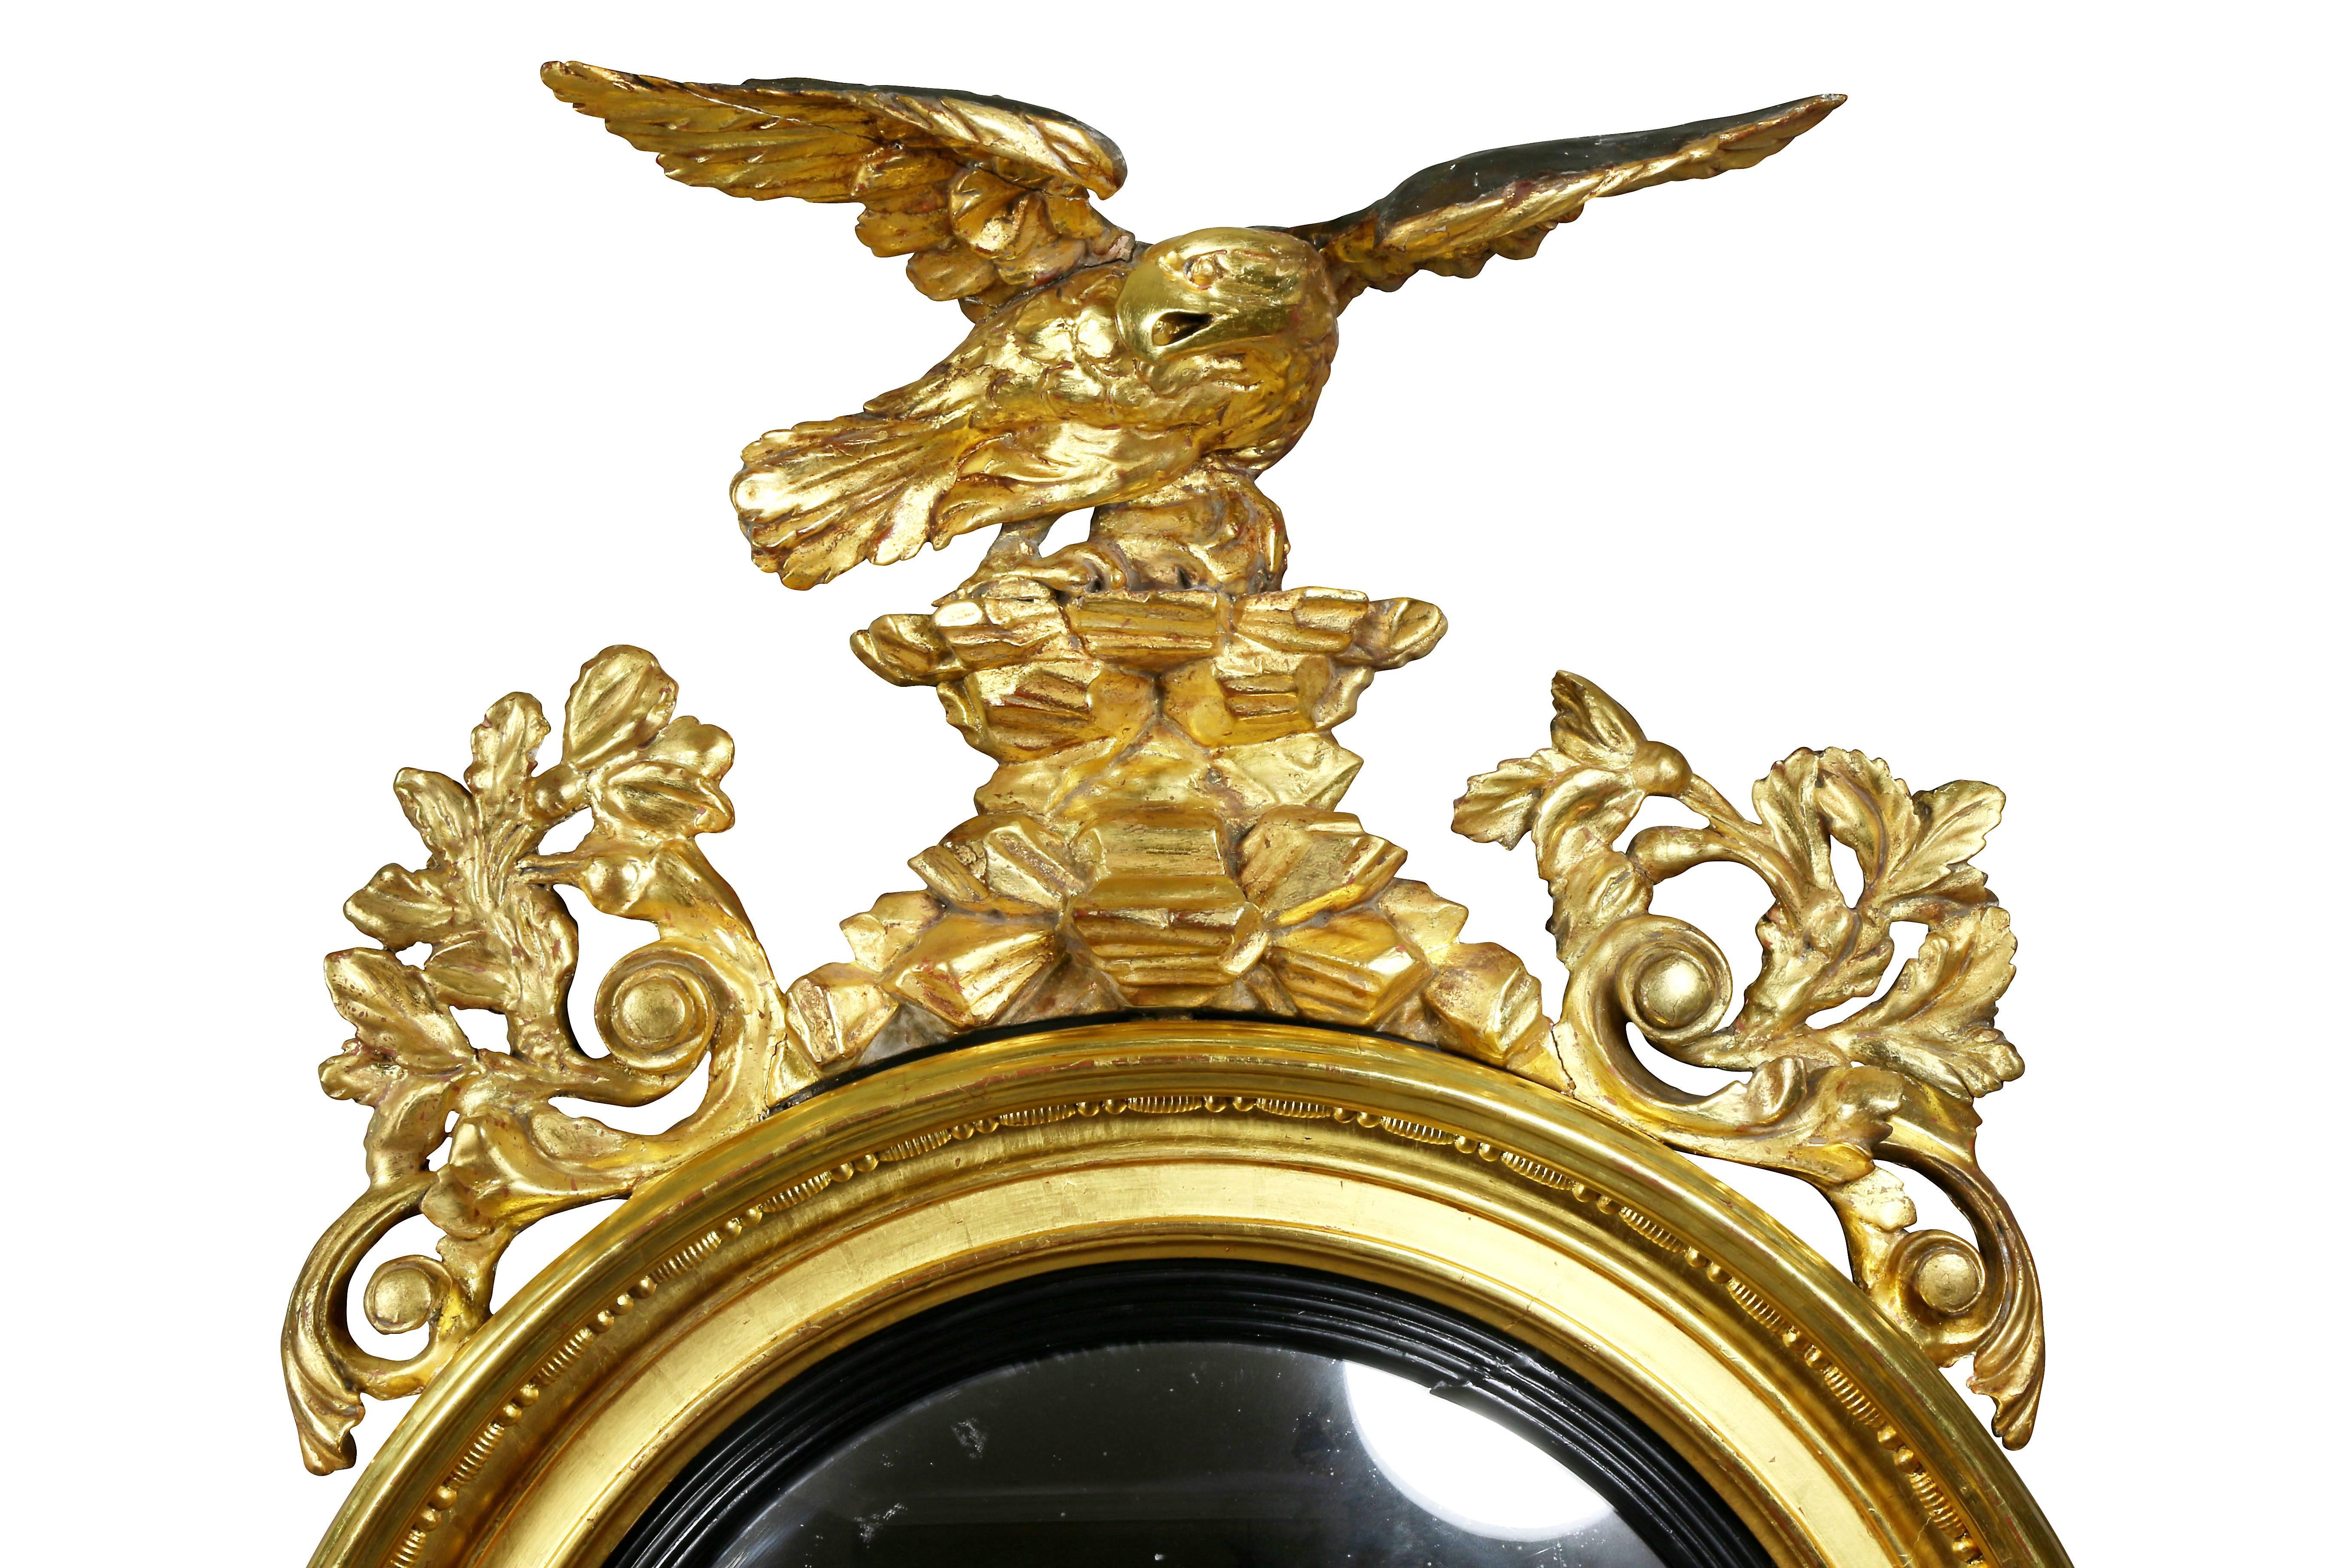 With eagle finial over rockwork flanked by arabesque carving over a convex mirror plate and four candlearms, below a central sunflower flanked by acanthus leaves.